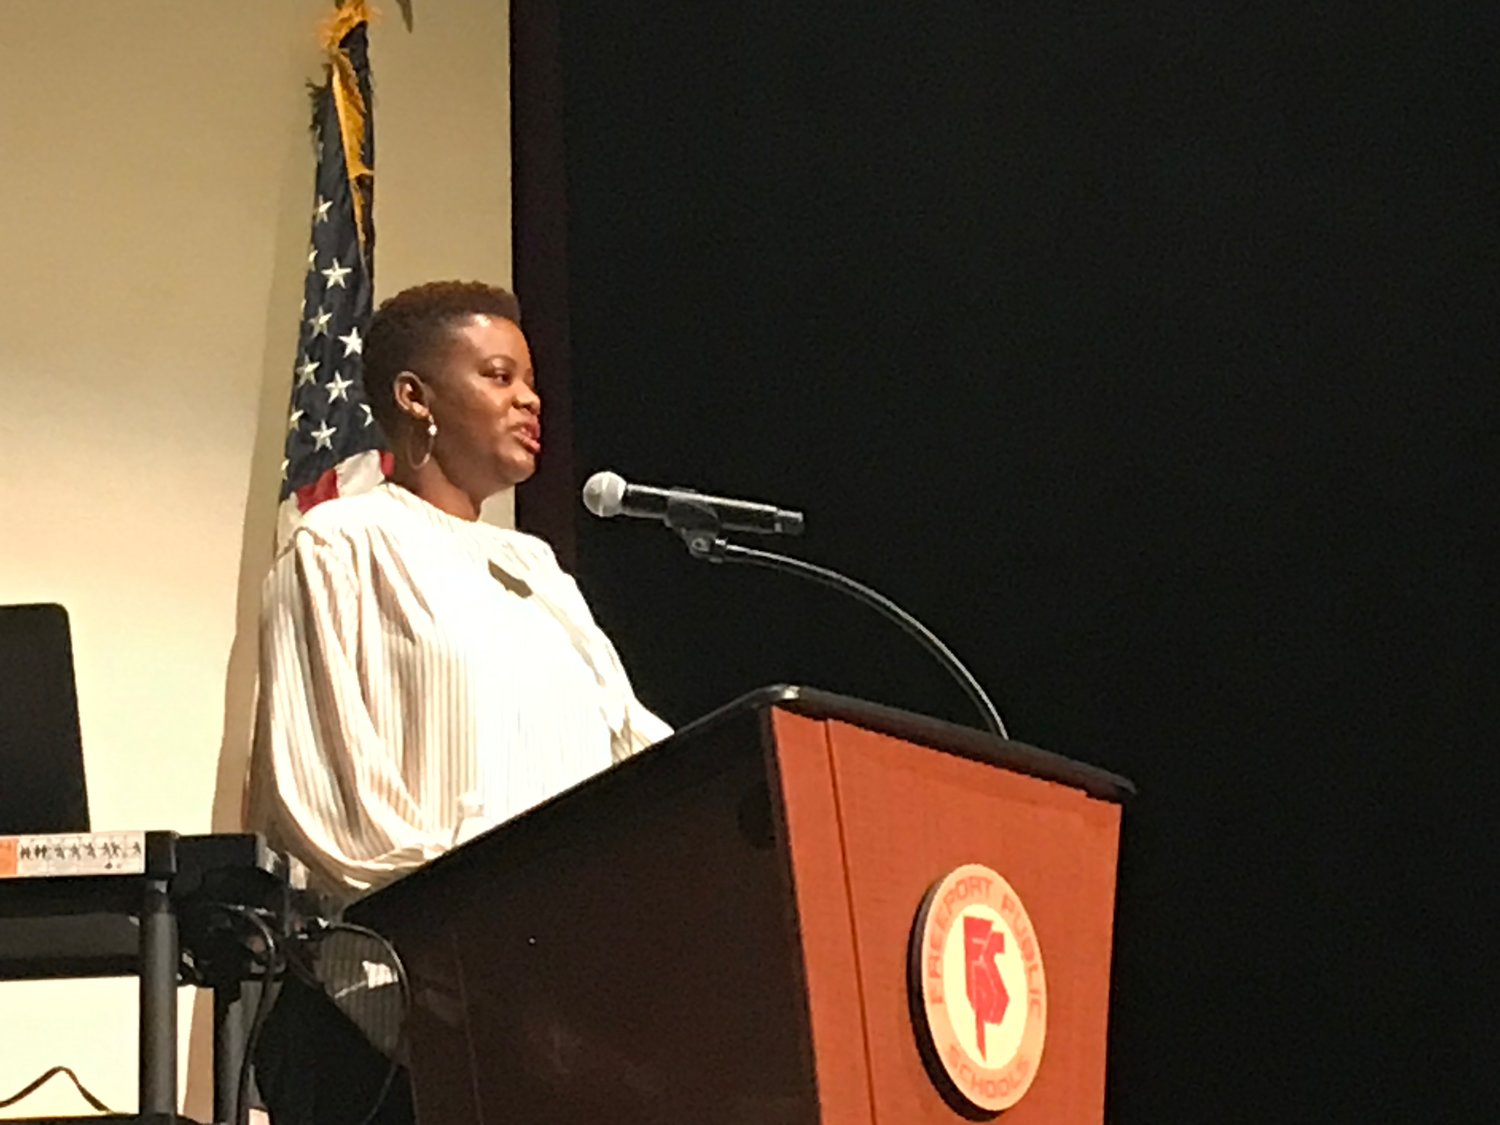 Ms. Consolee Nishimwe spoke to students and staff at Freeport High School as part of the Human Relations Club’s annual Human Rights Symposium.